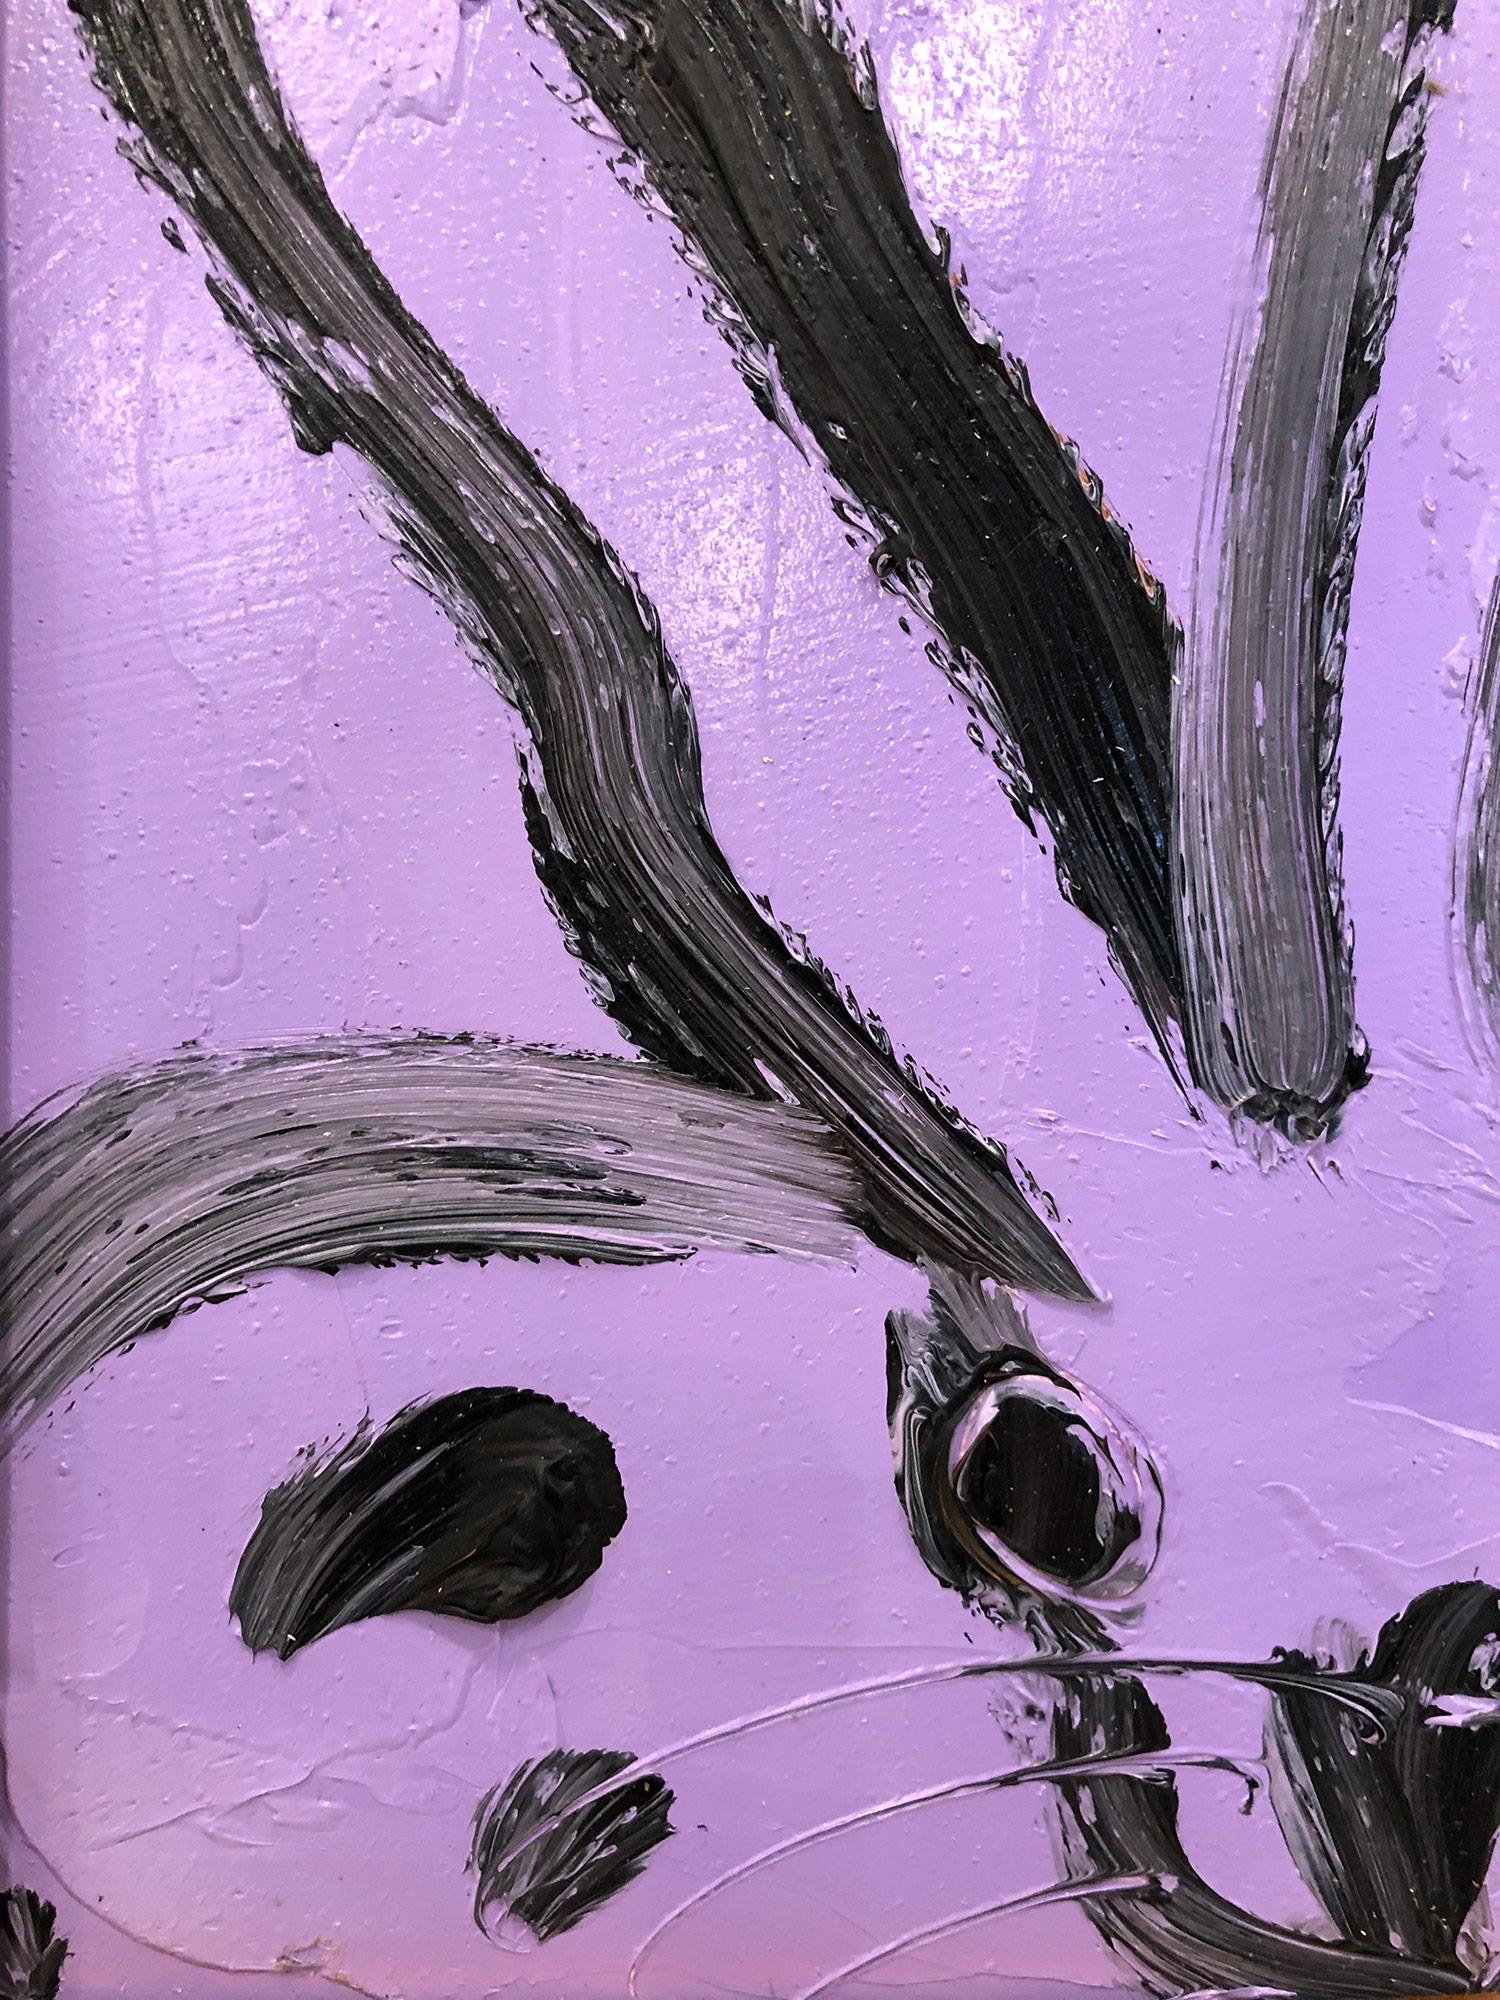 A wonderful composition of one of Slonem's most iconic subjects, Bunnies. This piece depicts a gestural figure of a black bunny on purple background with thick use of paint. It is housed in a wonderful antique 19th Century frame. Inspired by nature